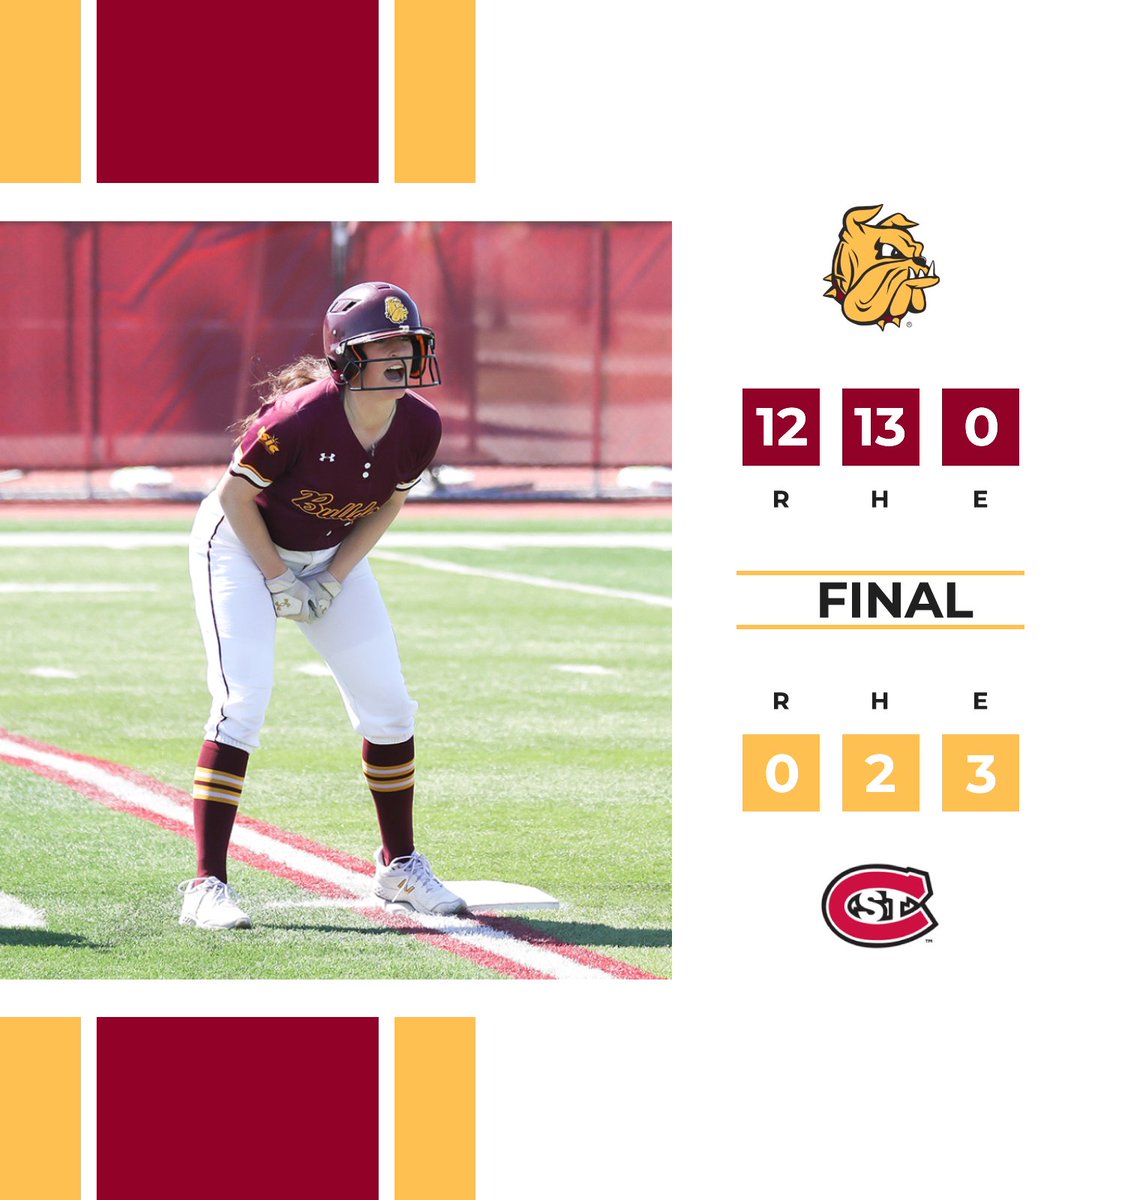 Bulldogs defeat the Huskies in five innings in game one!